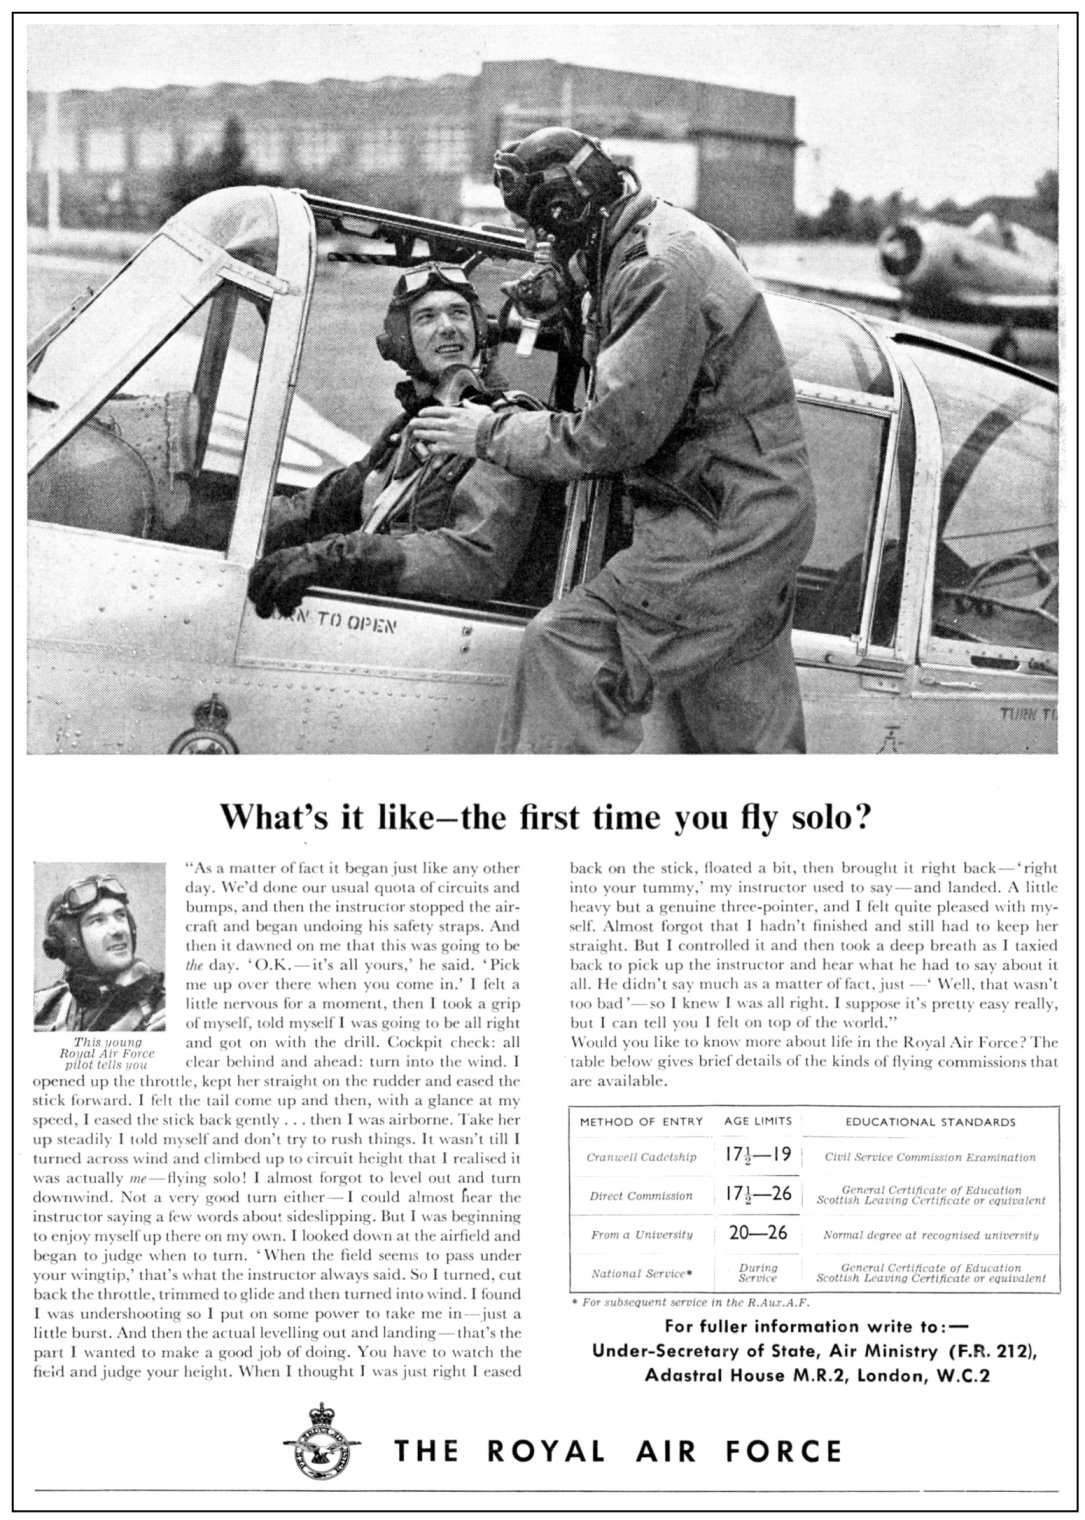 1955 RAF Recruitment Advert Featuring A Student Pilot About To Make His First Solo Flight In A  Chipmunk Aircraft